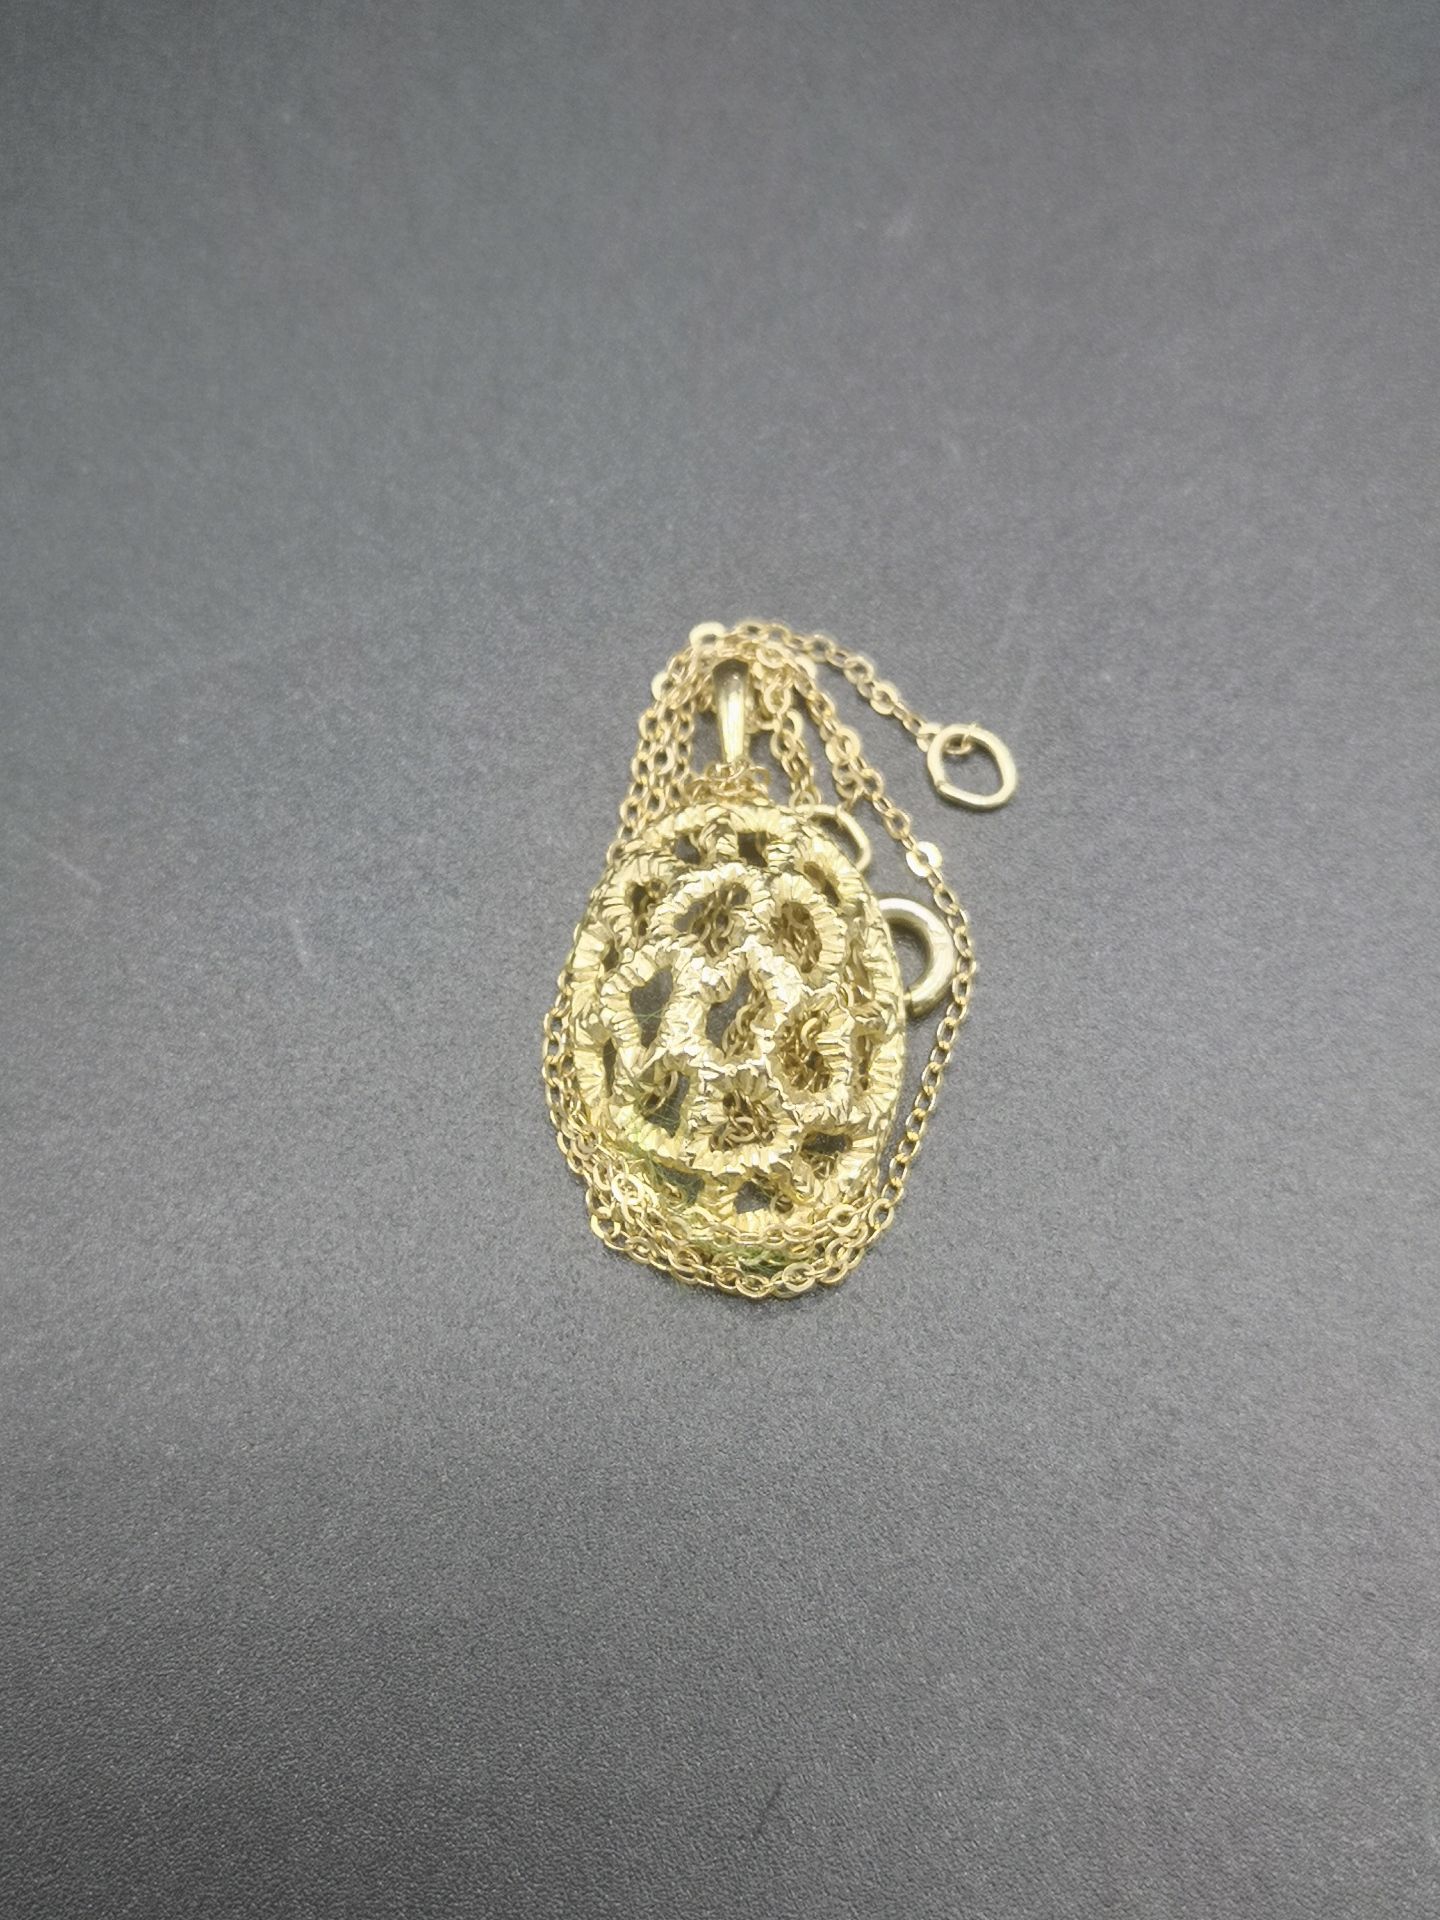 9ct gold necklace and pendant - Image 6 of 6